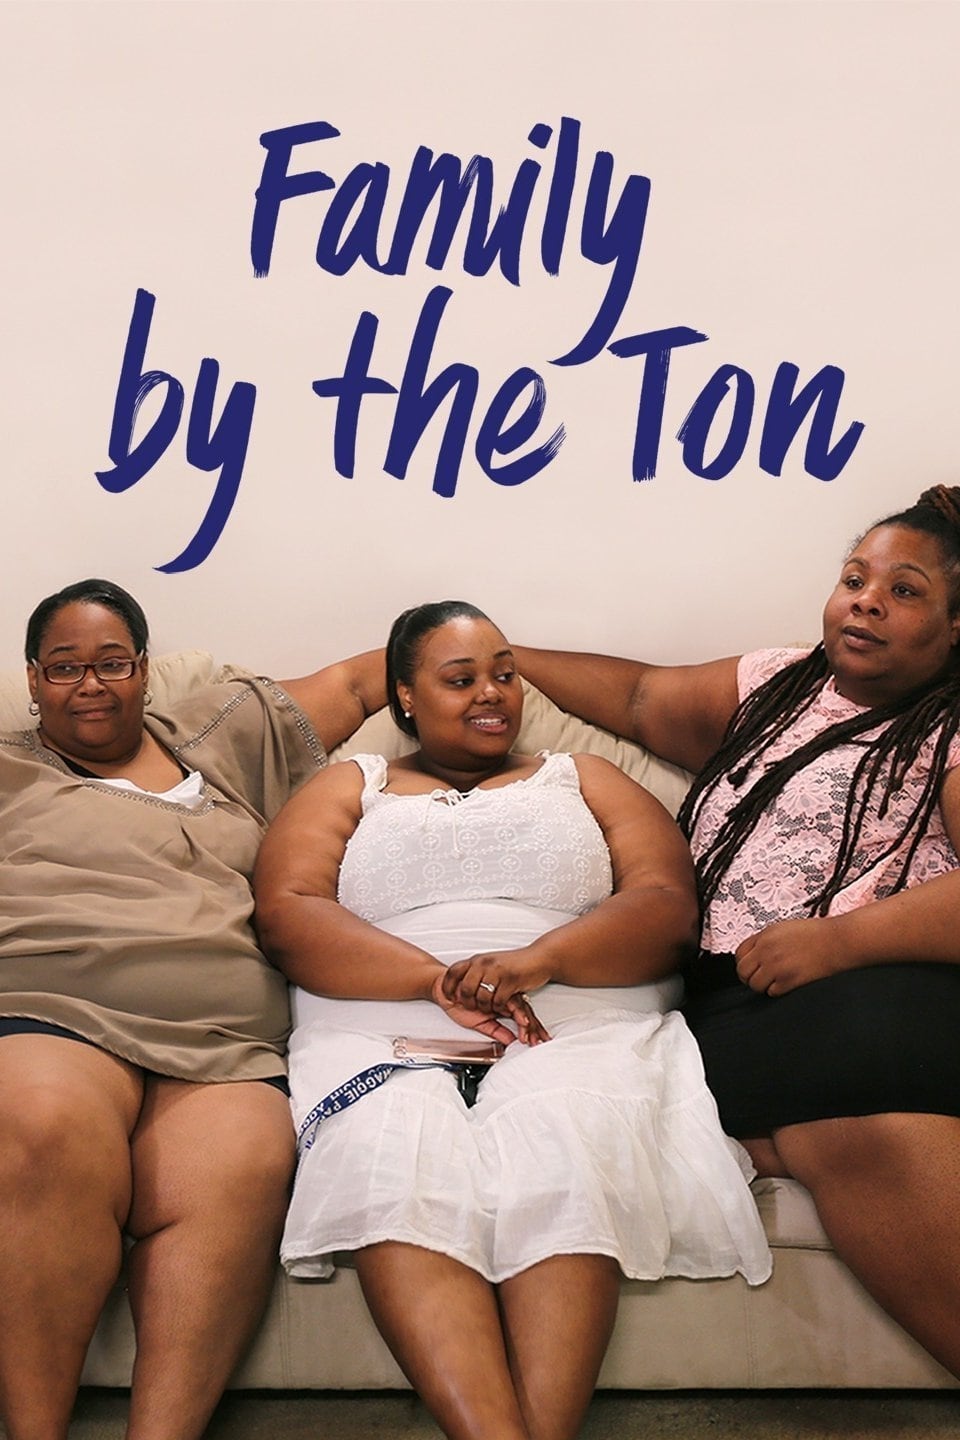 Family By the Ton